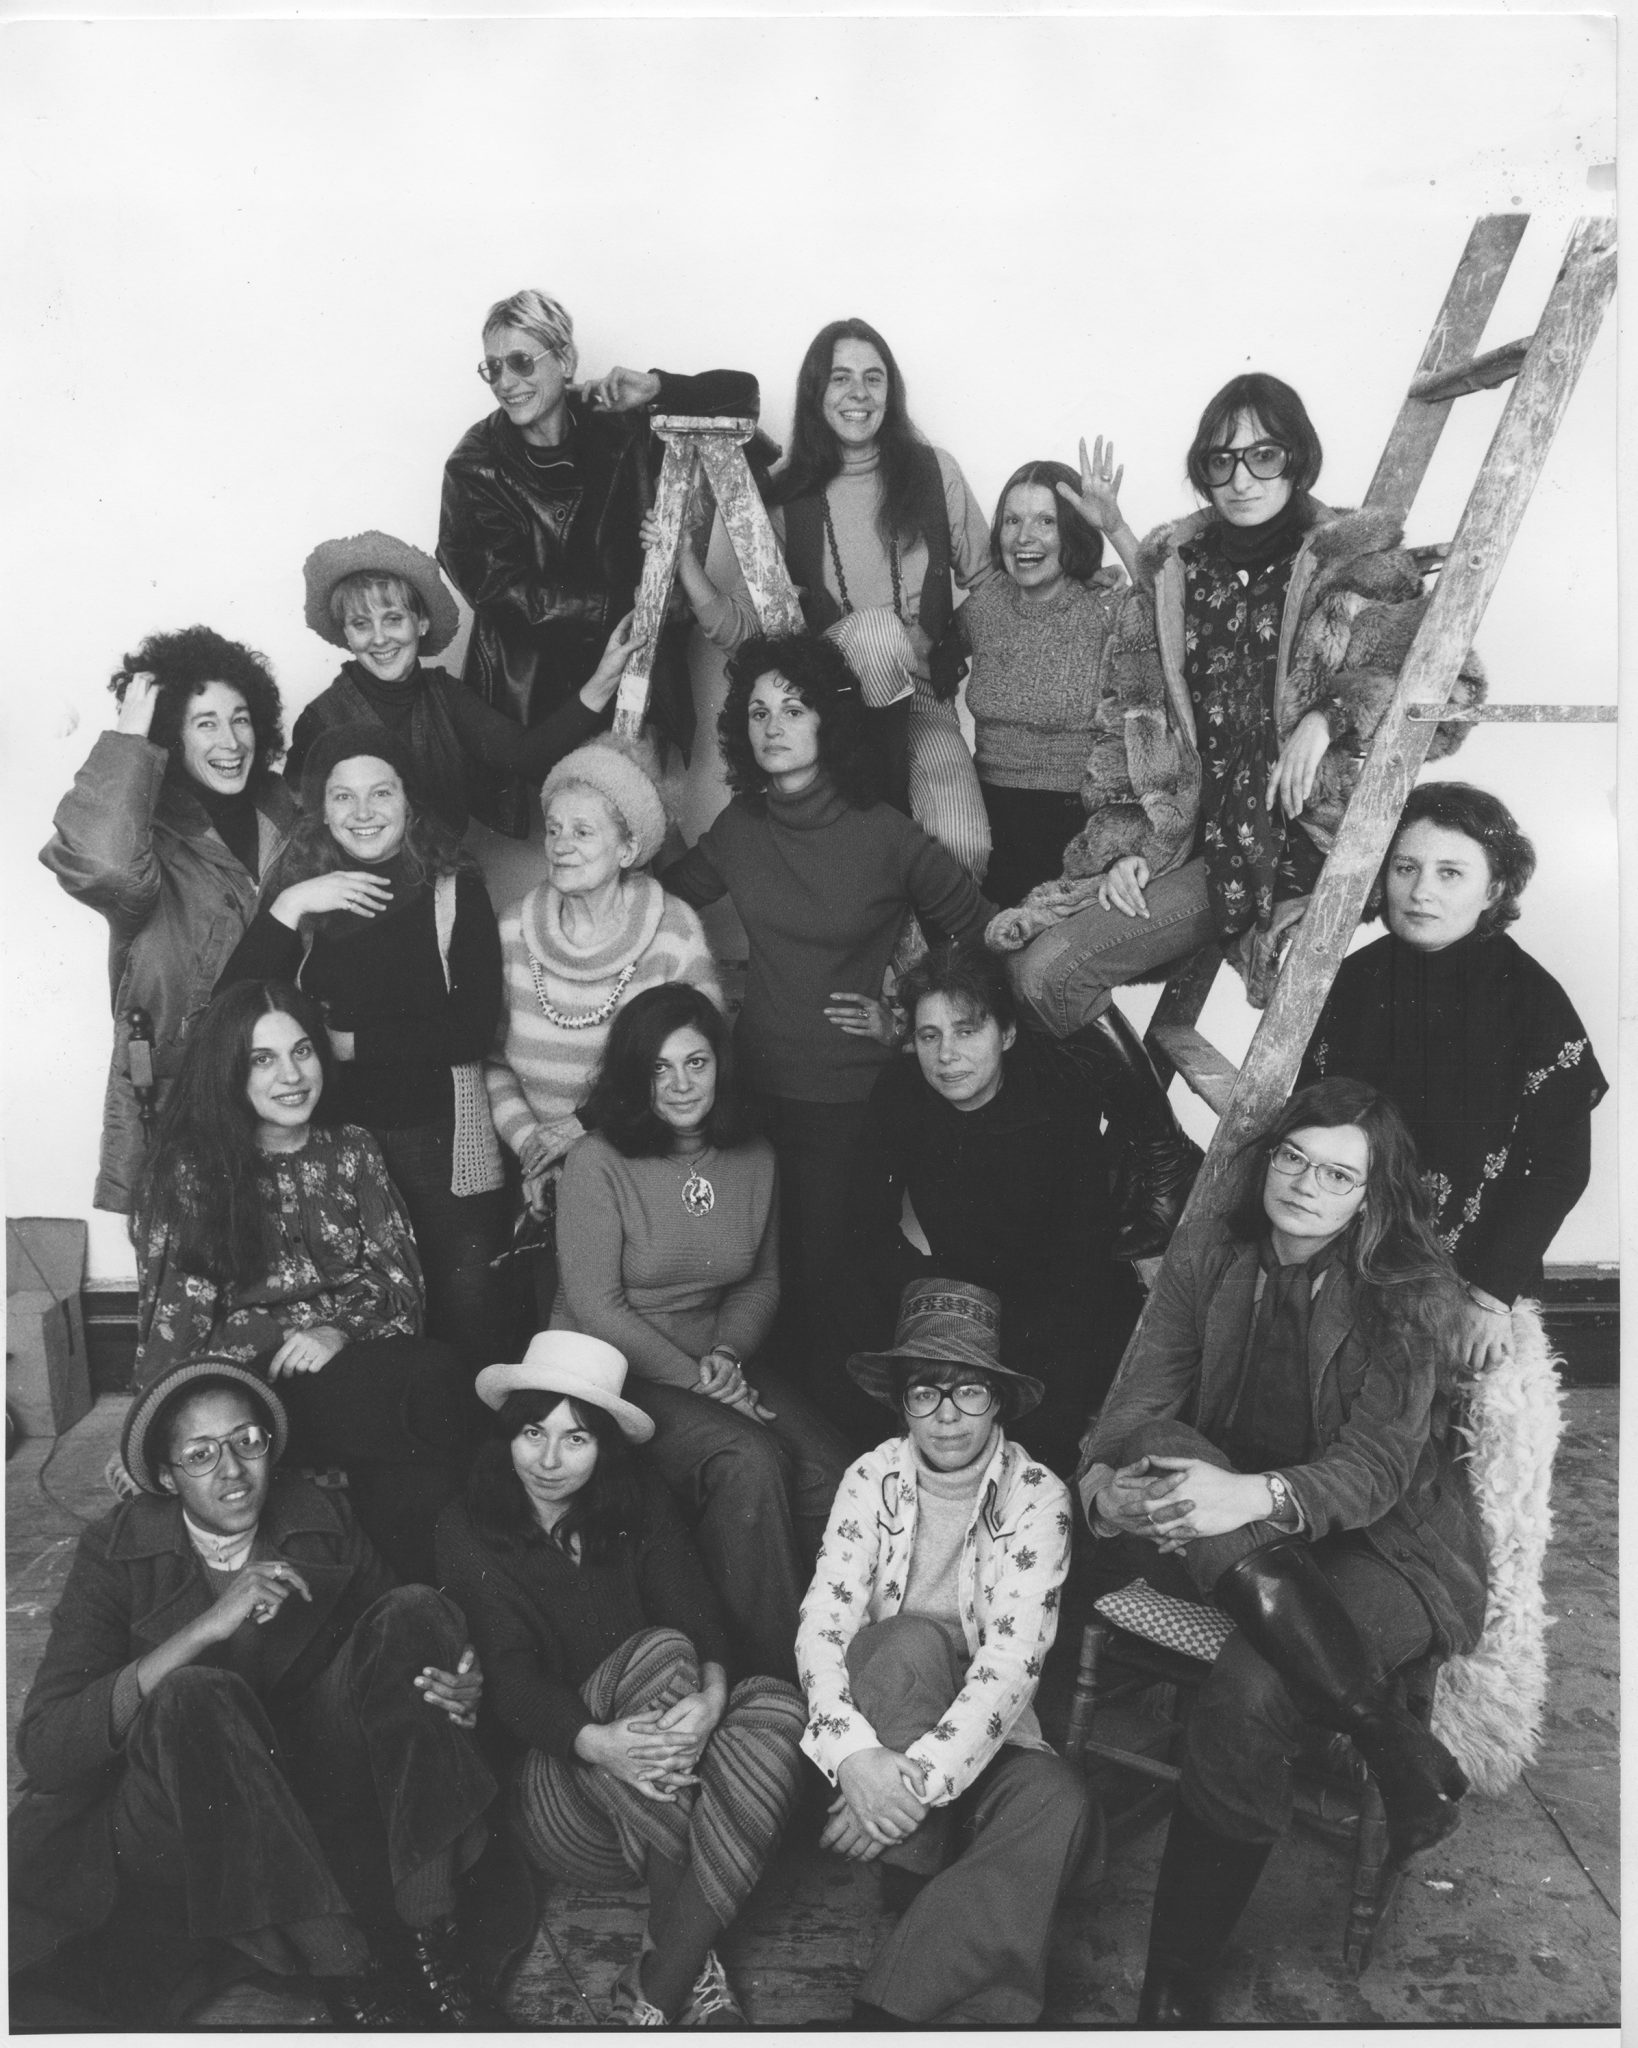 A black-and-white photograph shows a group of women from an elevated perspective. The women have light, medium, and medium-dark skin tones and smile at the camera. Many of them are wearing eccentric hats, beanies, and sunglasses.